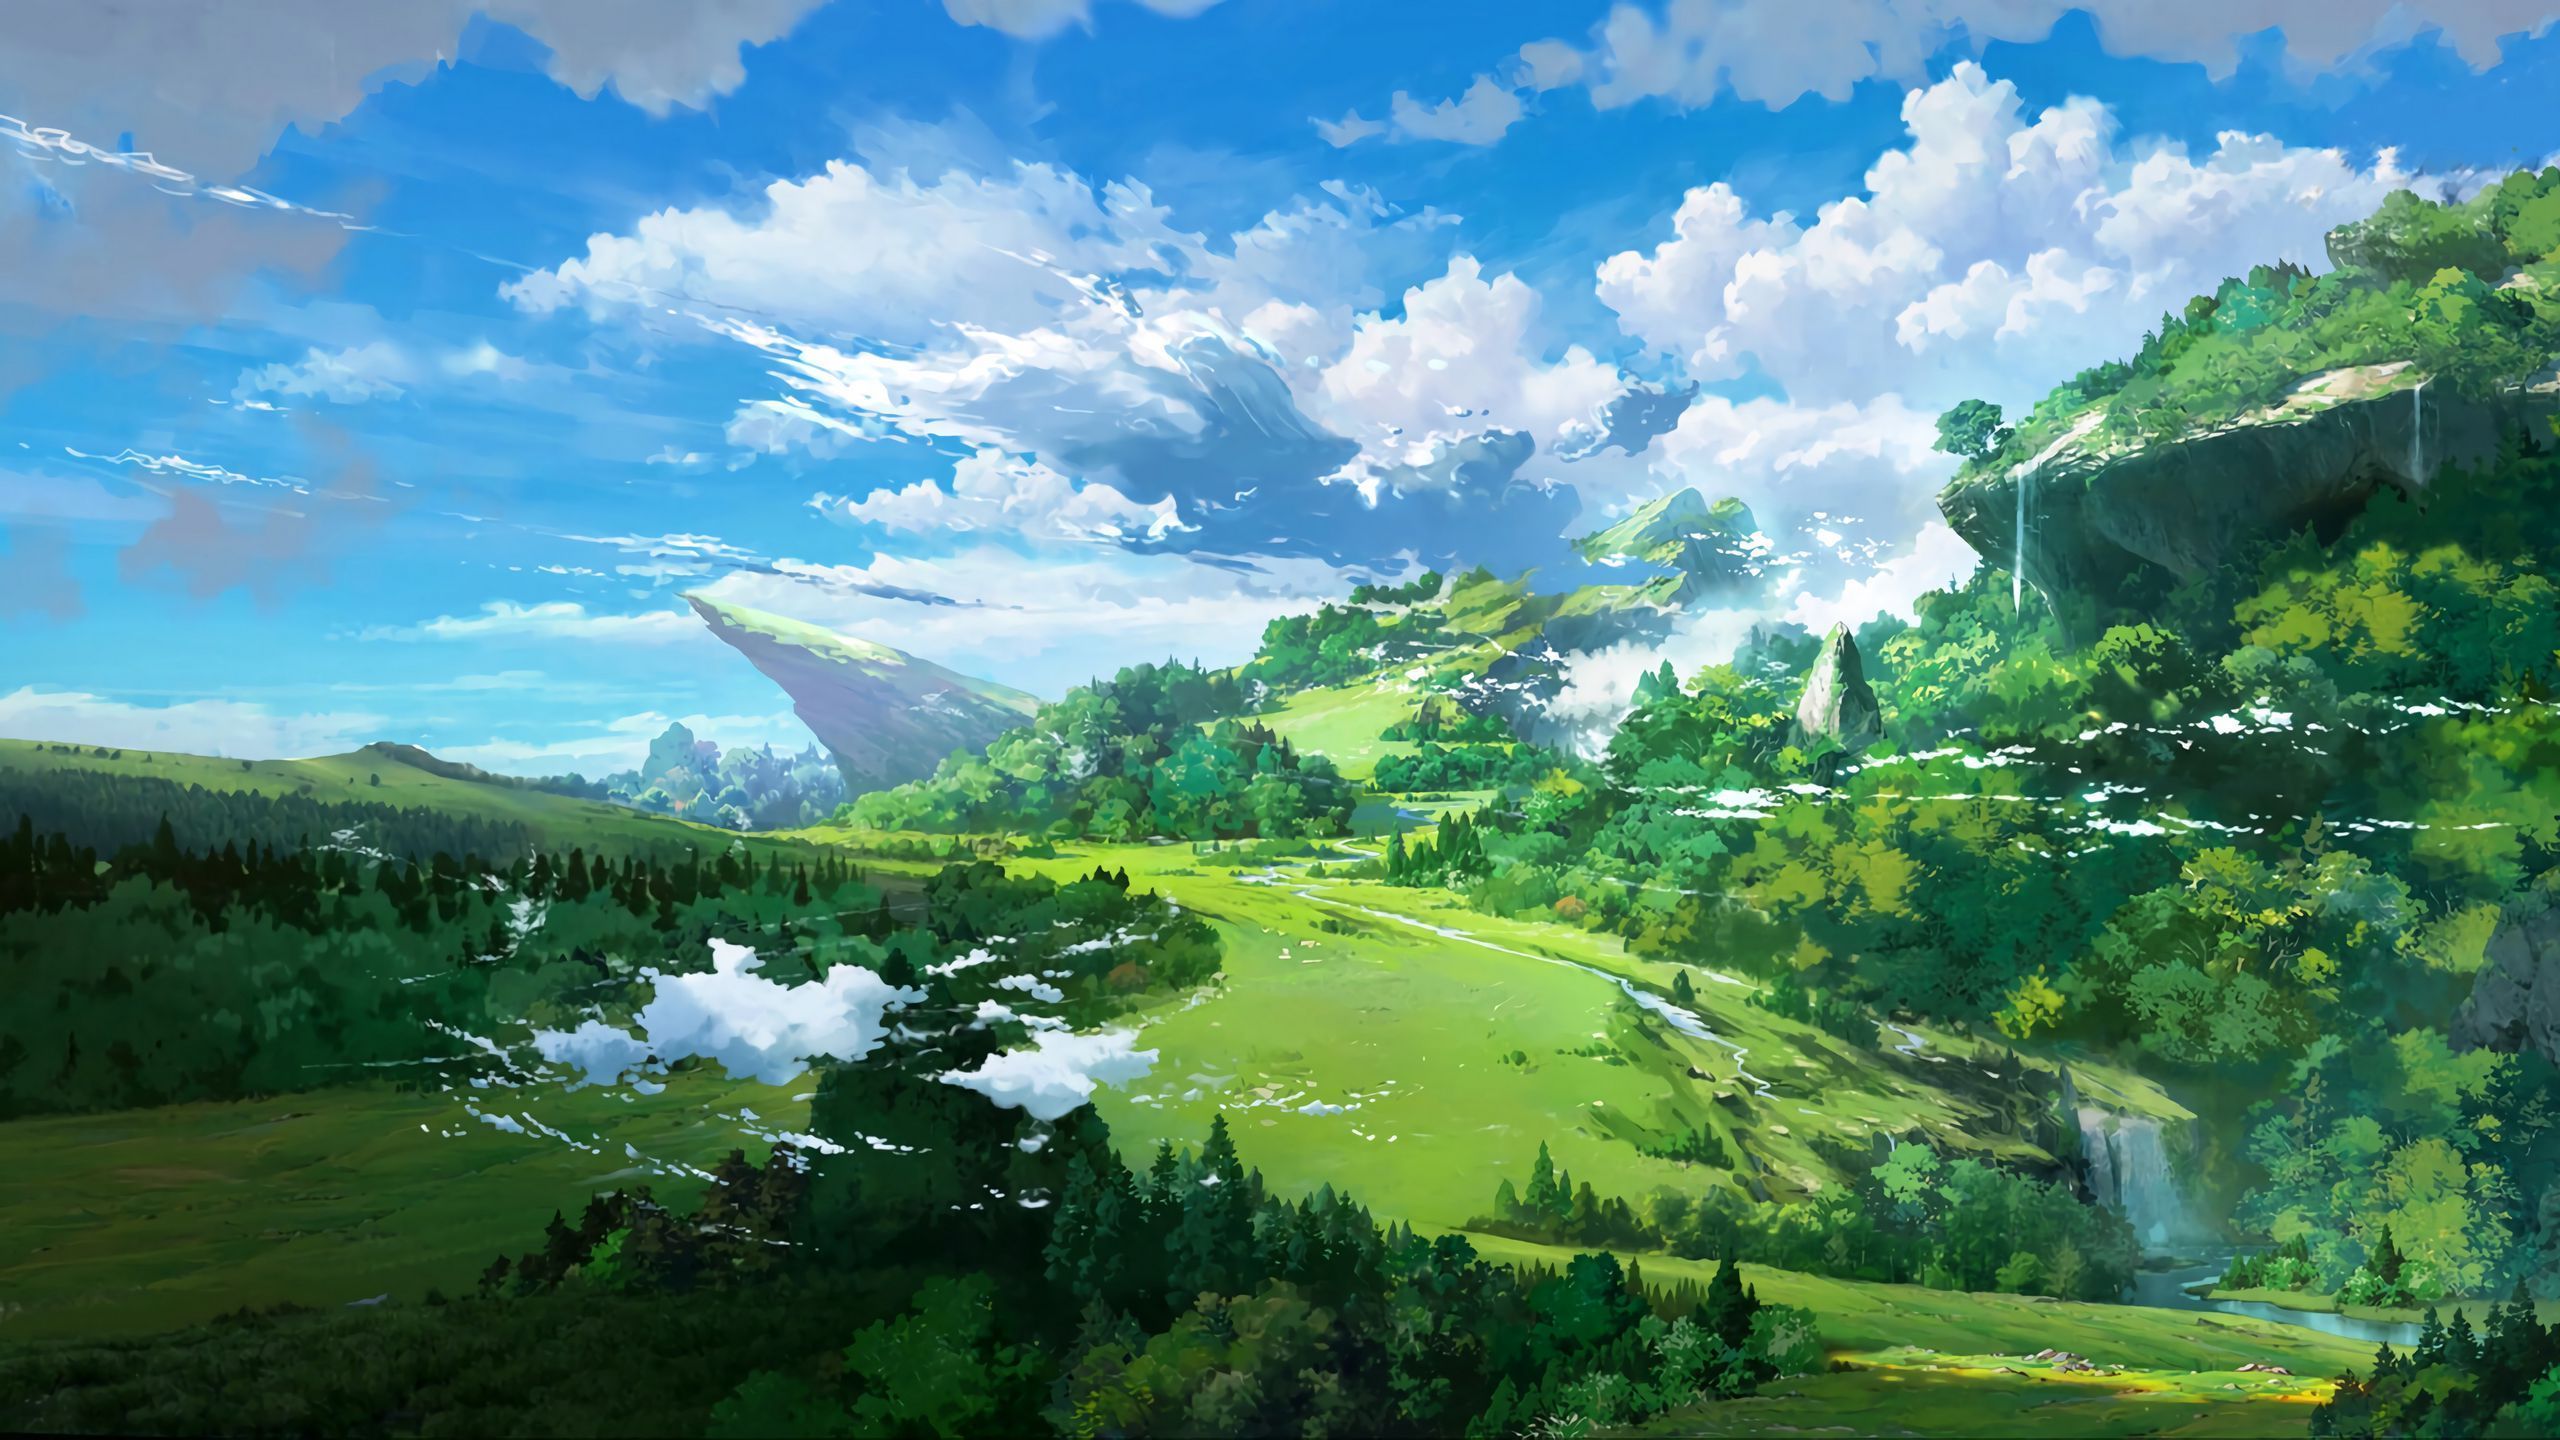 Download 1920x1080 anime, landscape, sky, clouds, waterfall, meadow, trees, grass, ... - 2560x1440